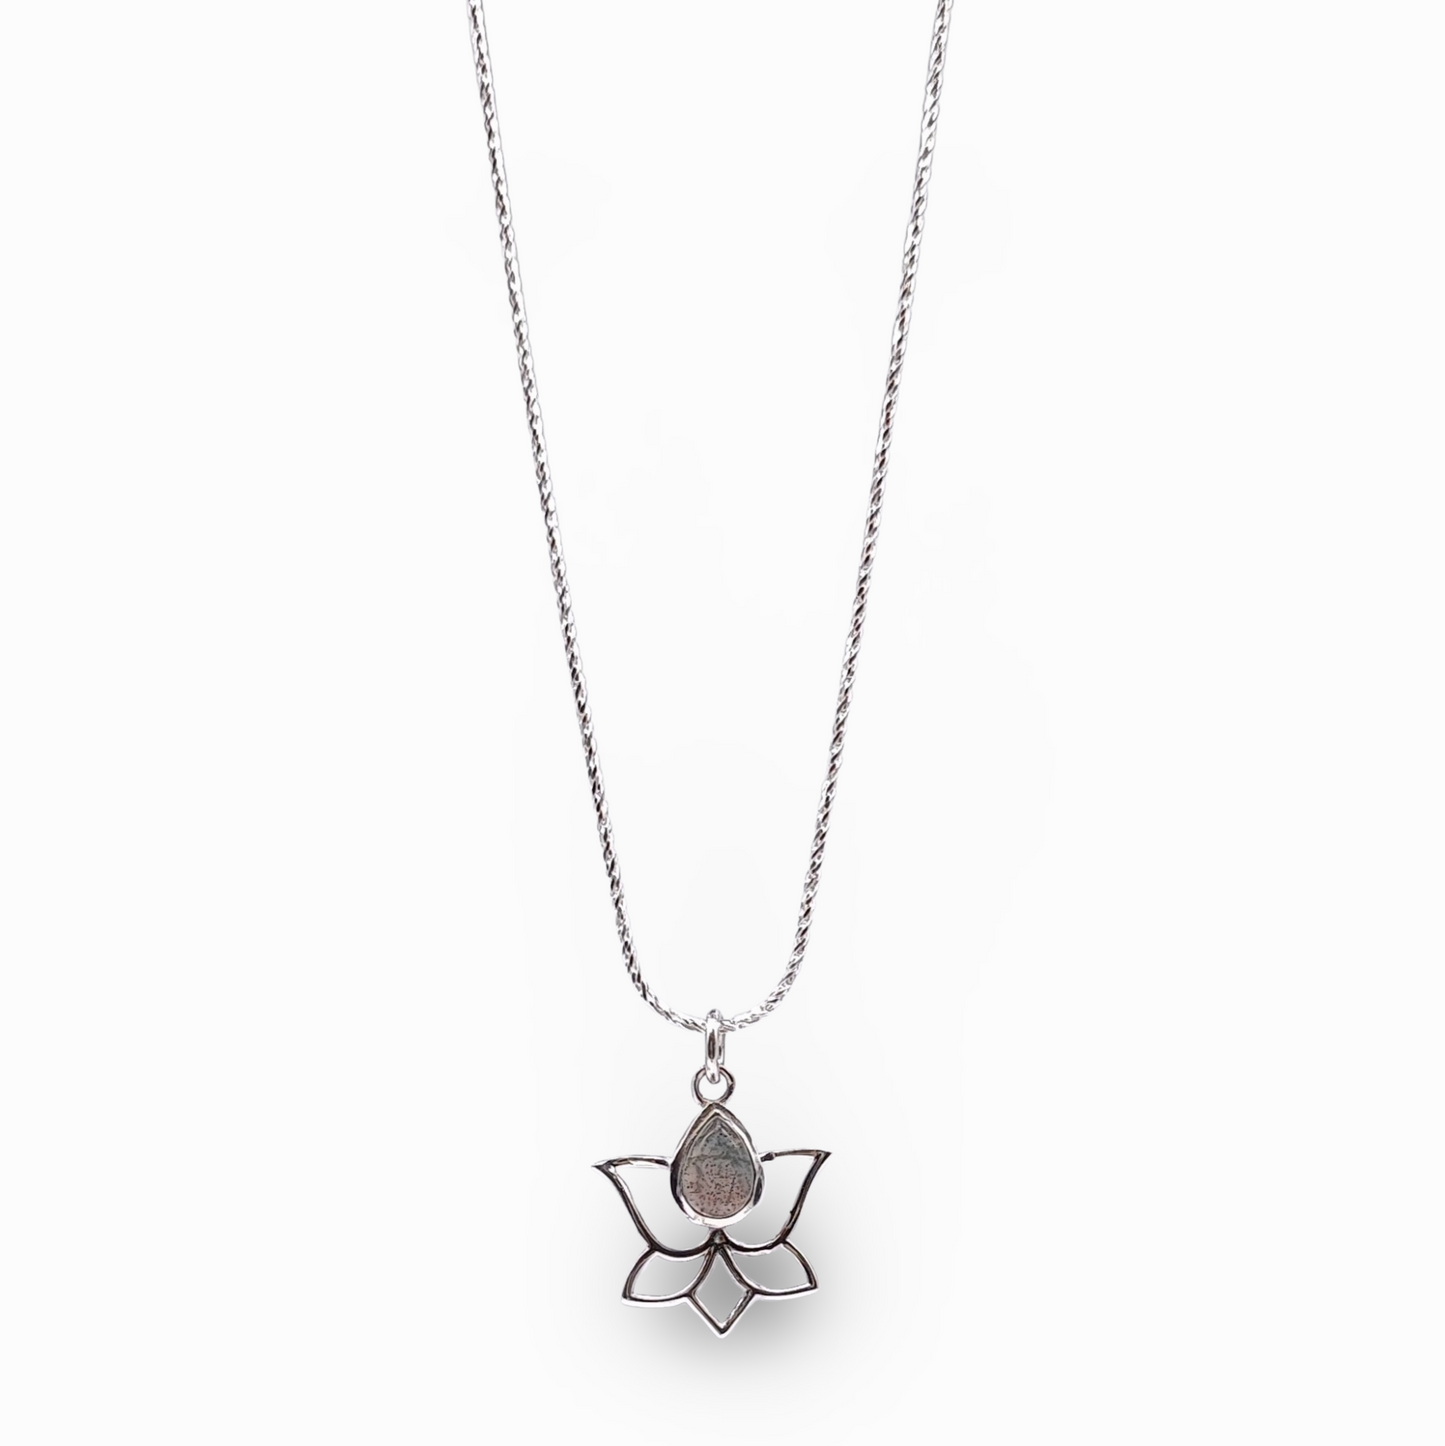 Necklace -925 Sterling Silver -Lotus -Decorated with Gemstones - Arômes et Évasions